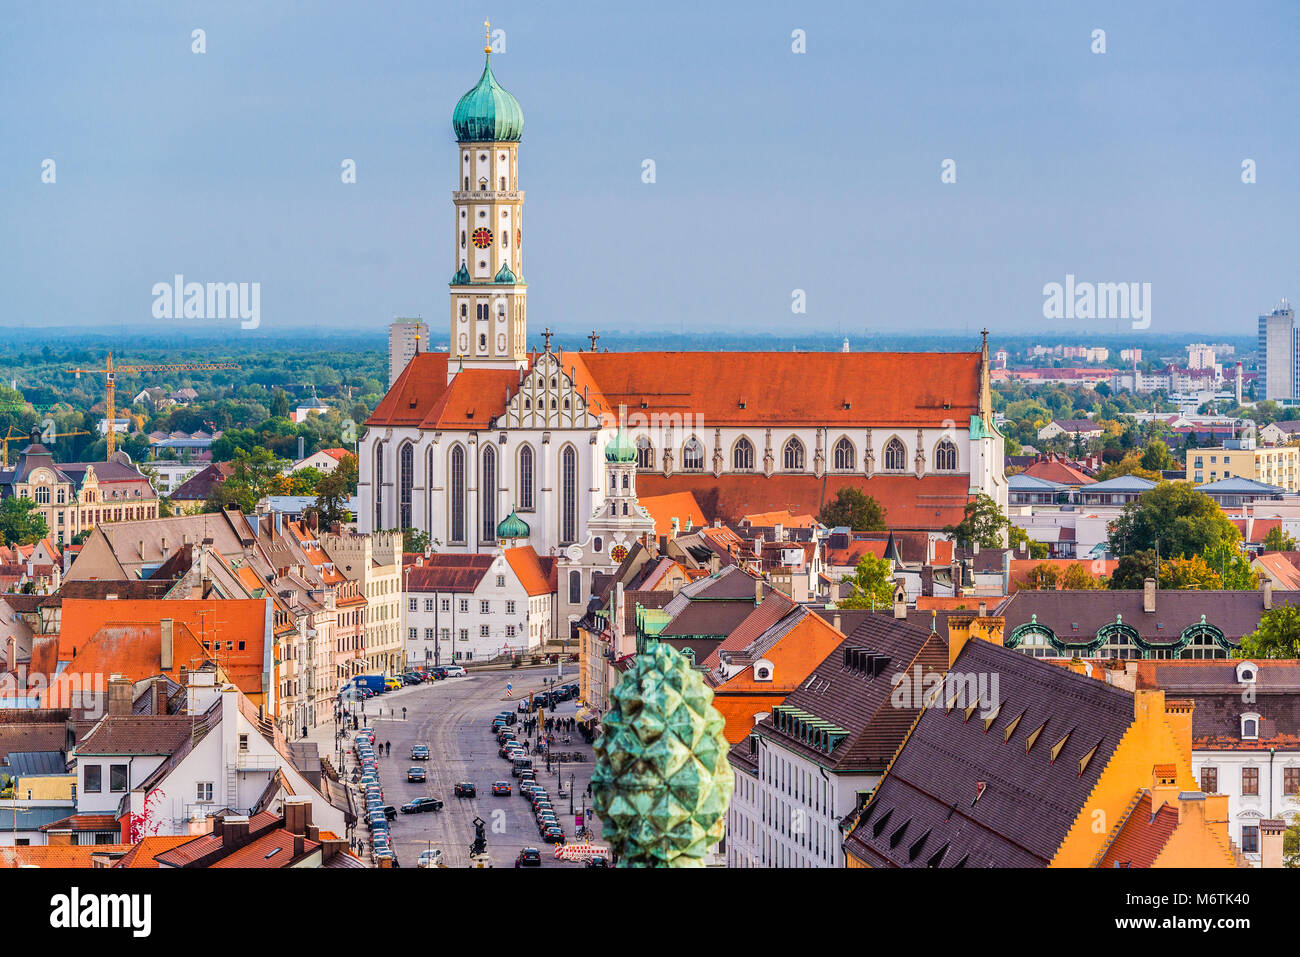 Augsburg, Germany skyline with cathedrals. Stock Photo